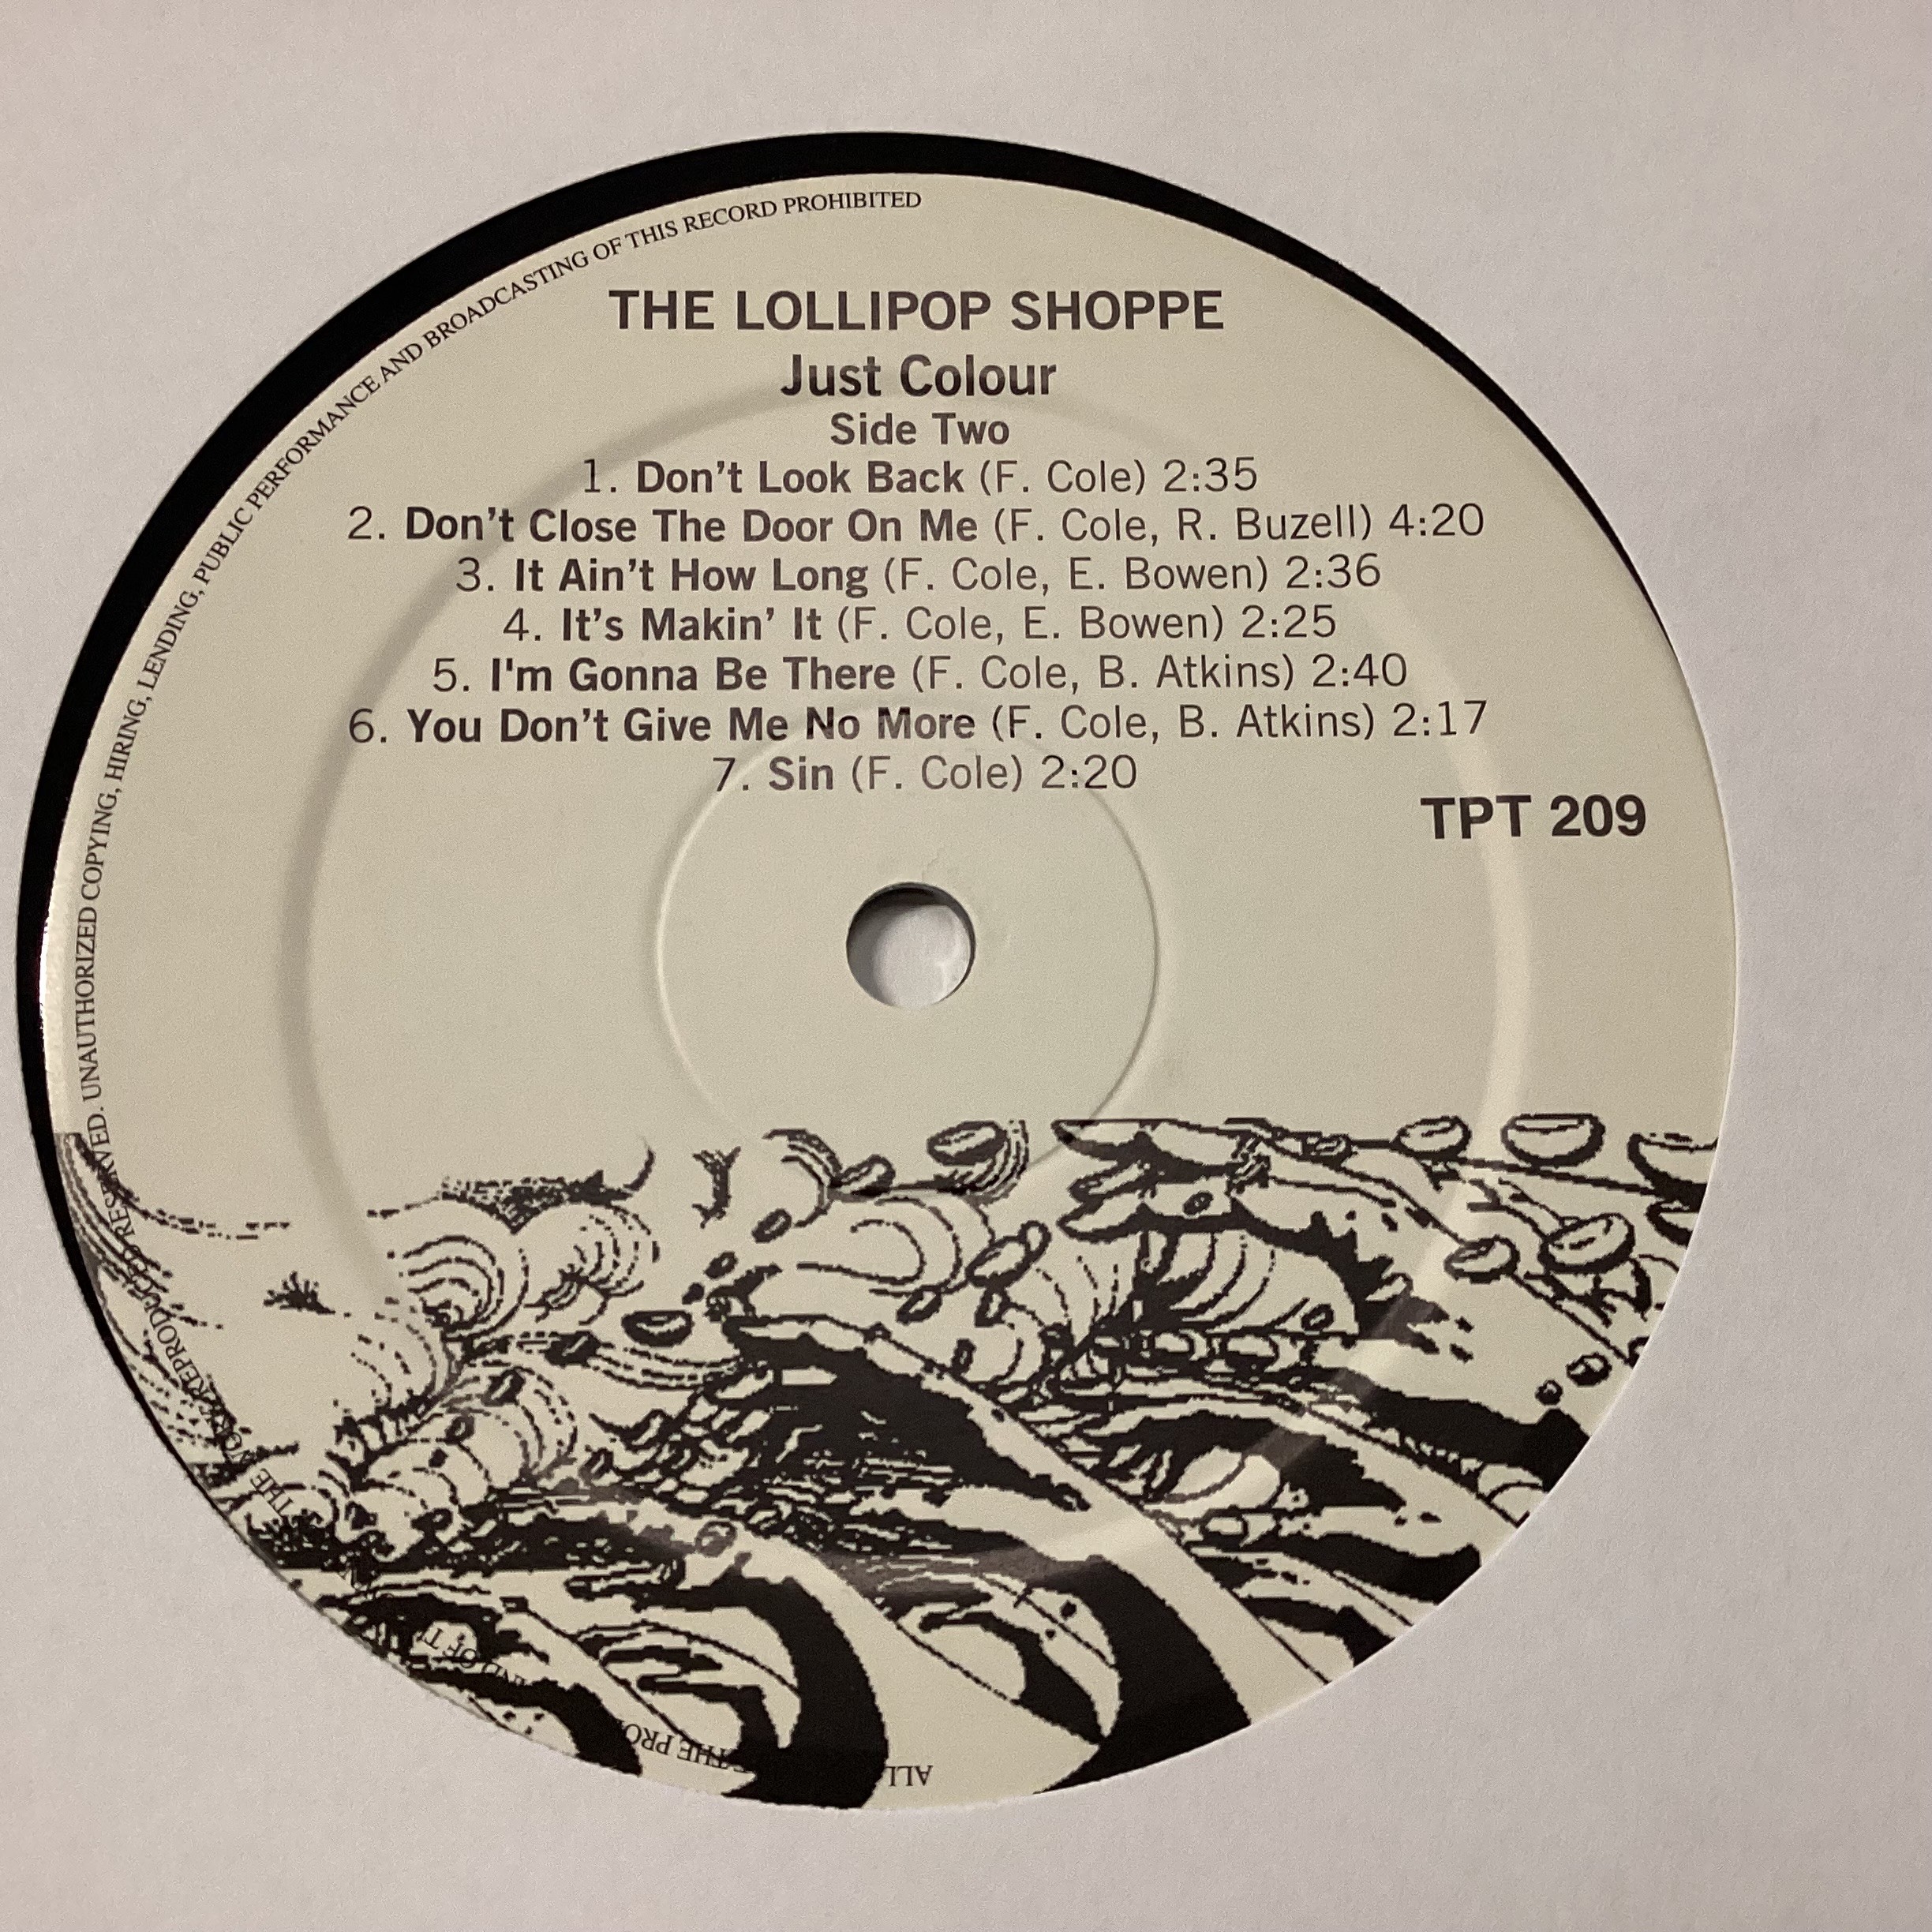 THE LOLLIPOP SHOPPE ‘JUST COLOUR’ VINYL ALBUM. Found here pressed on Tapestry Records TPT 209 from - Image 4 of 5